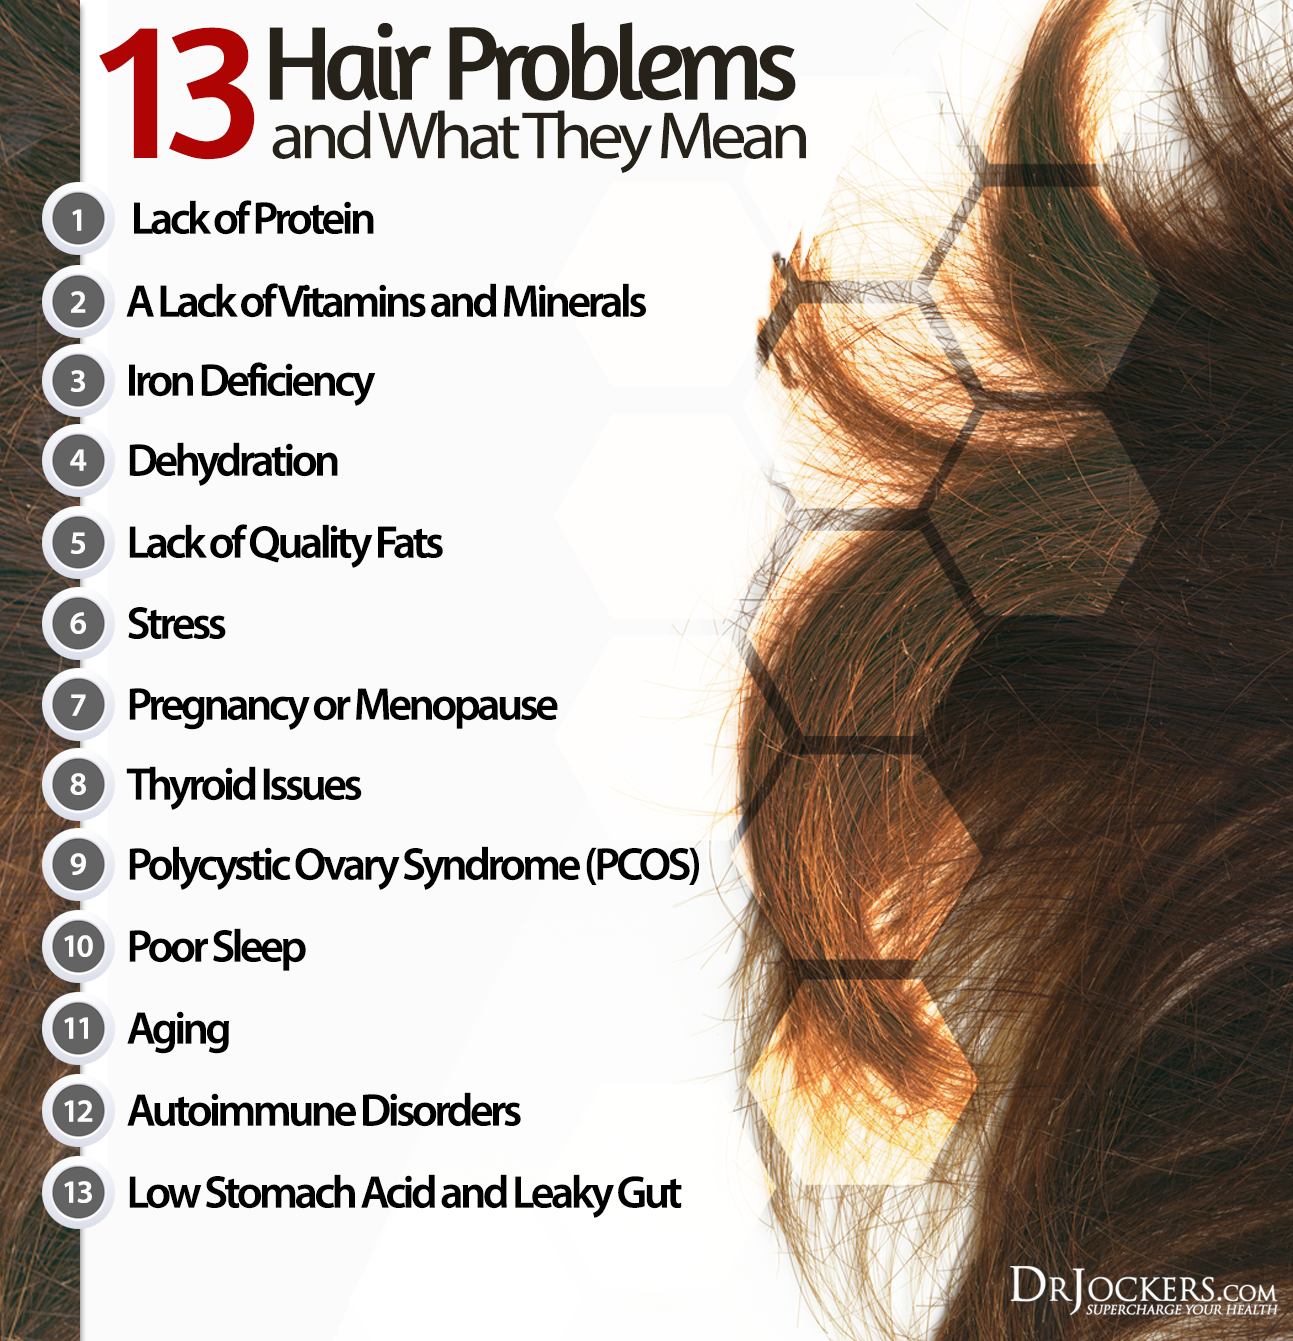 13 Hair Problems and What They Mean 